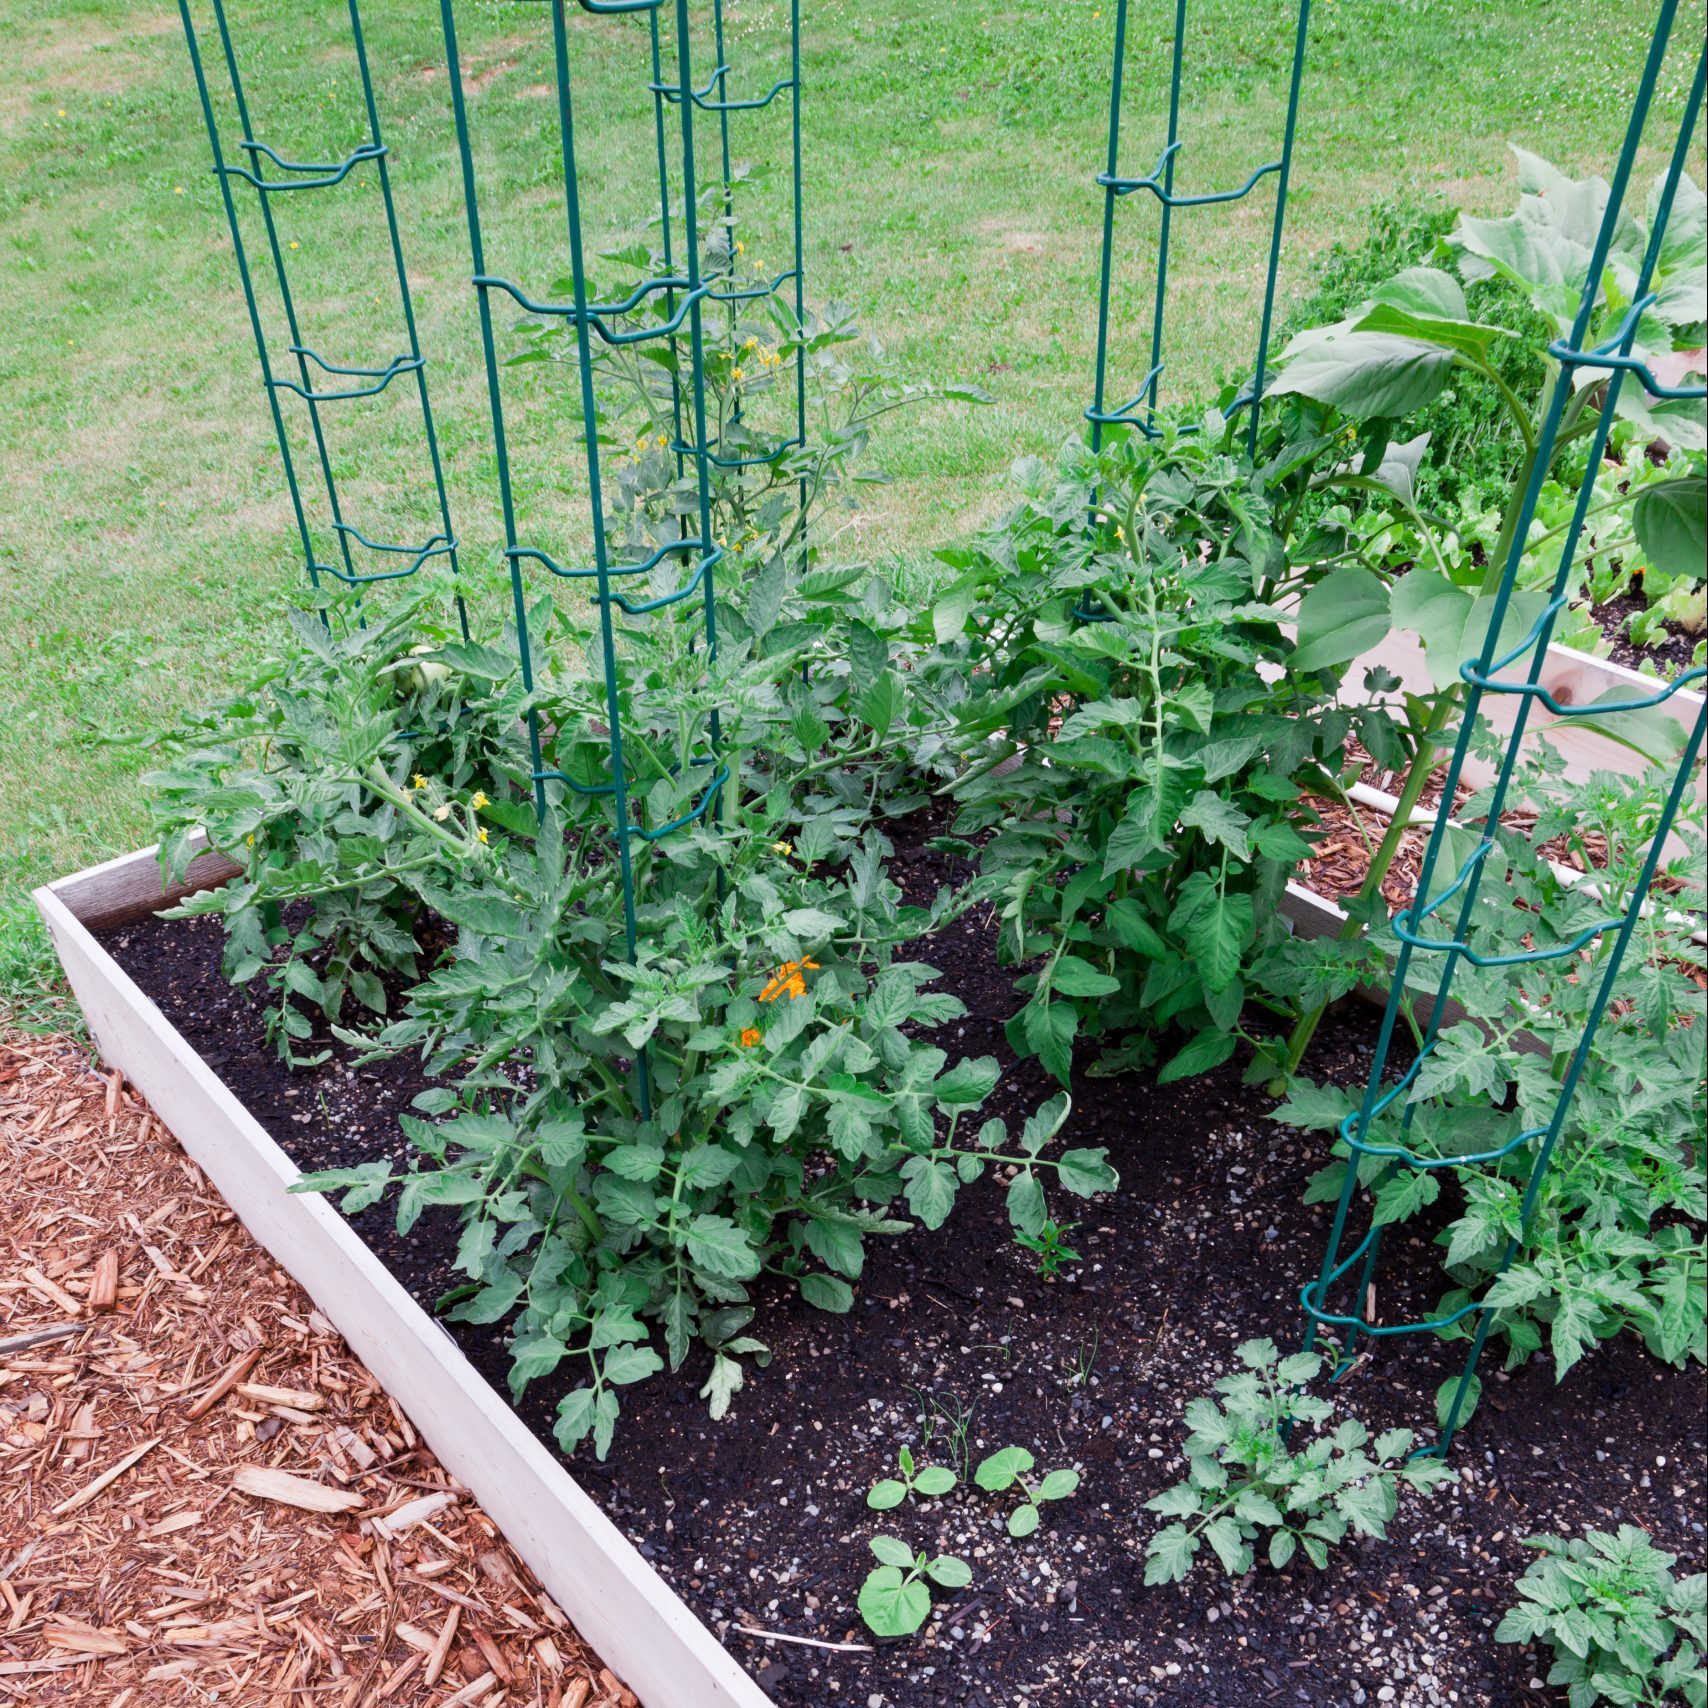 4 Simple Ways To Support Tomato Plants Local Seeds